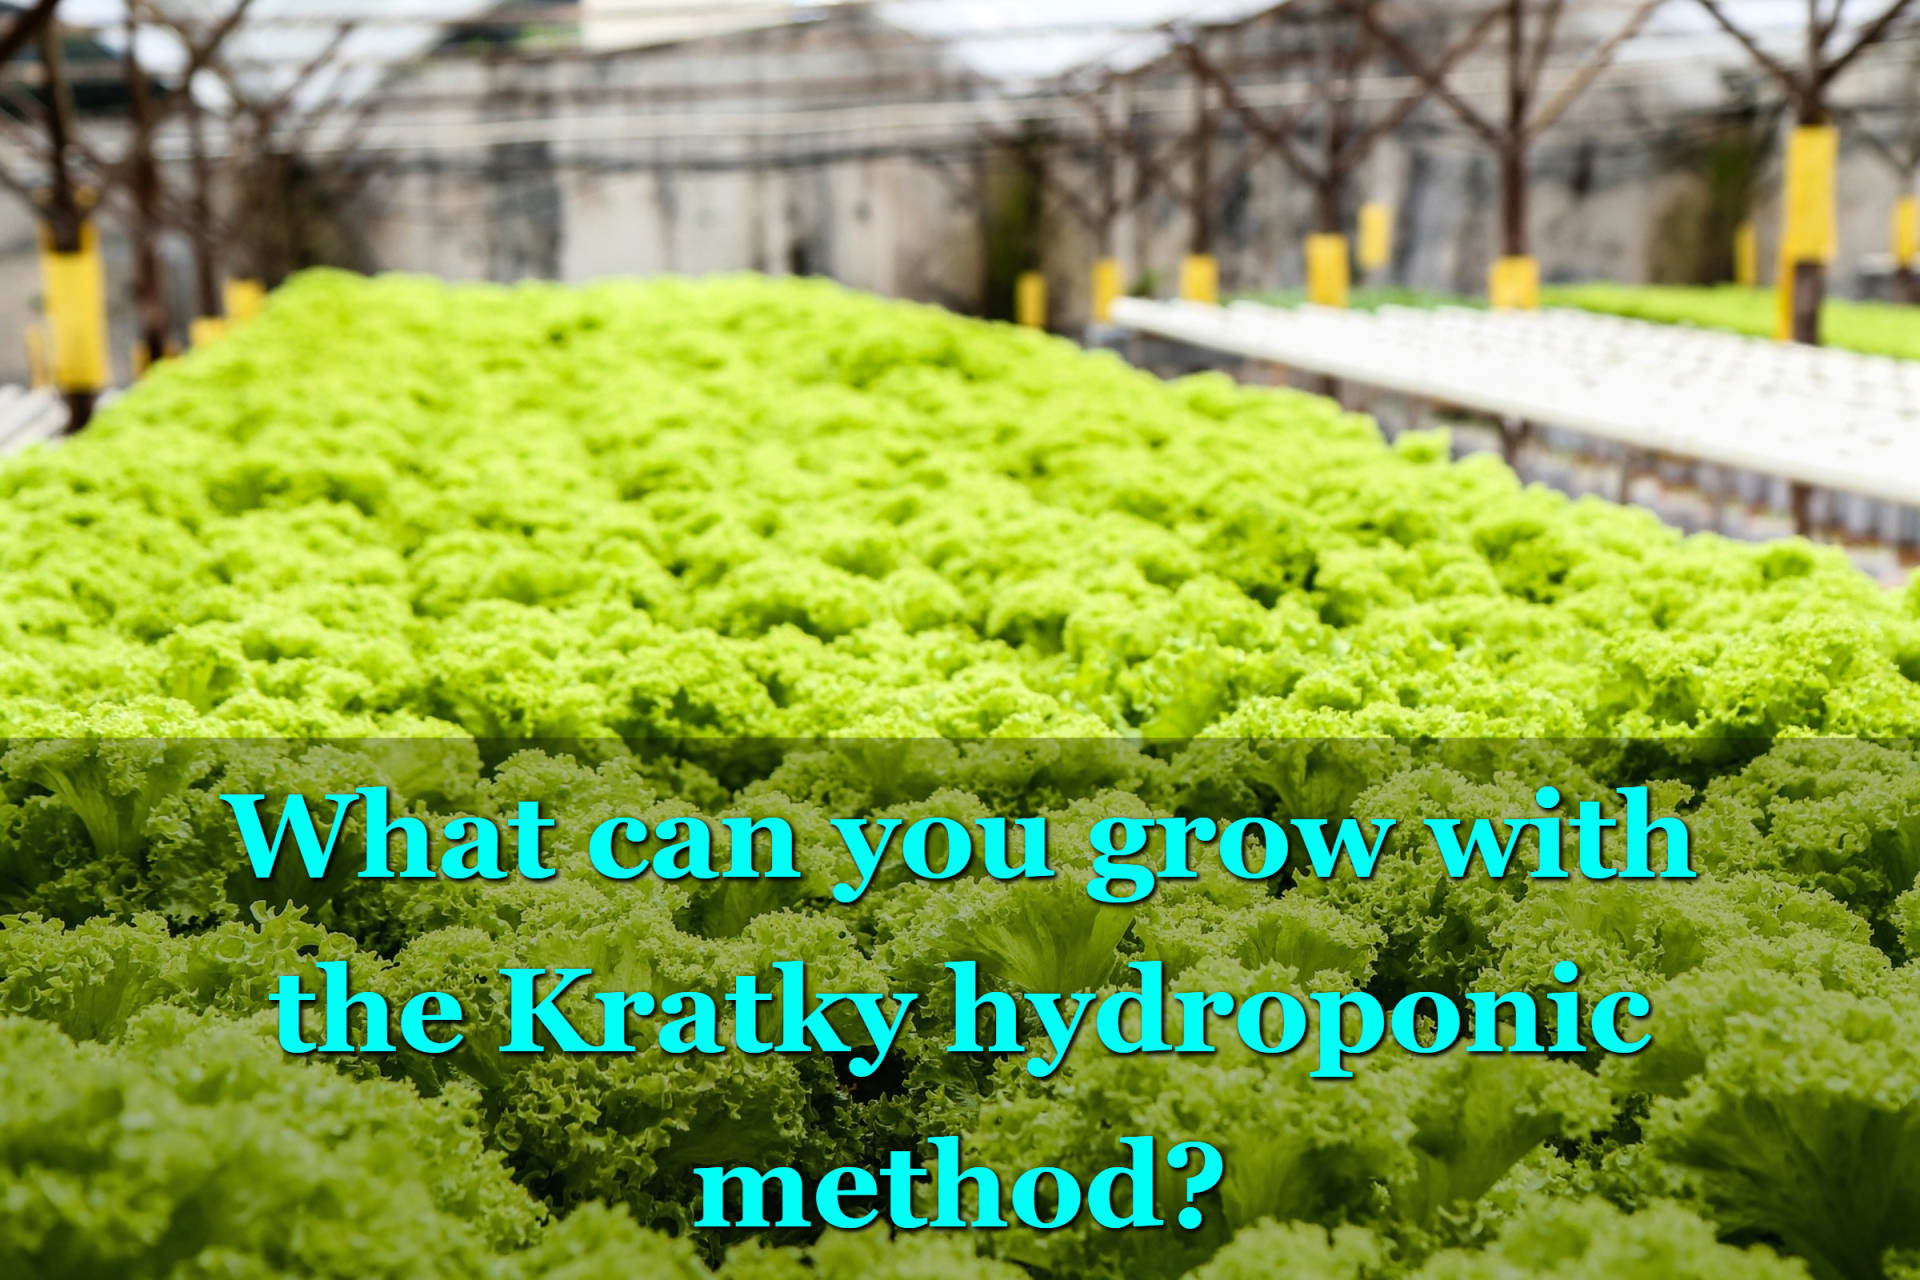 Plants growing in a hydroponic environment.